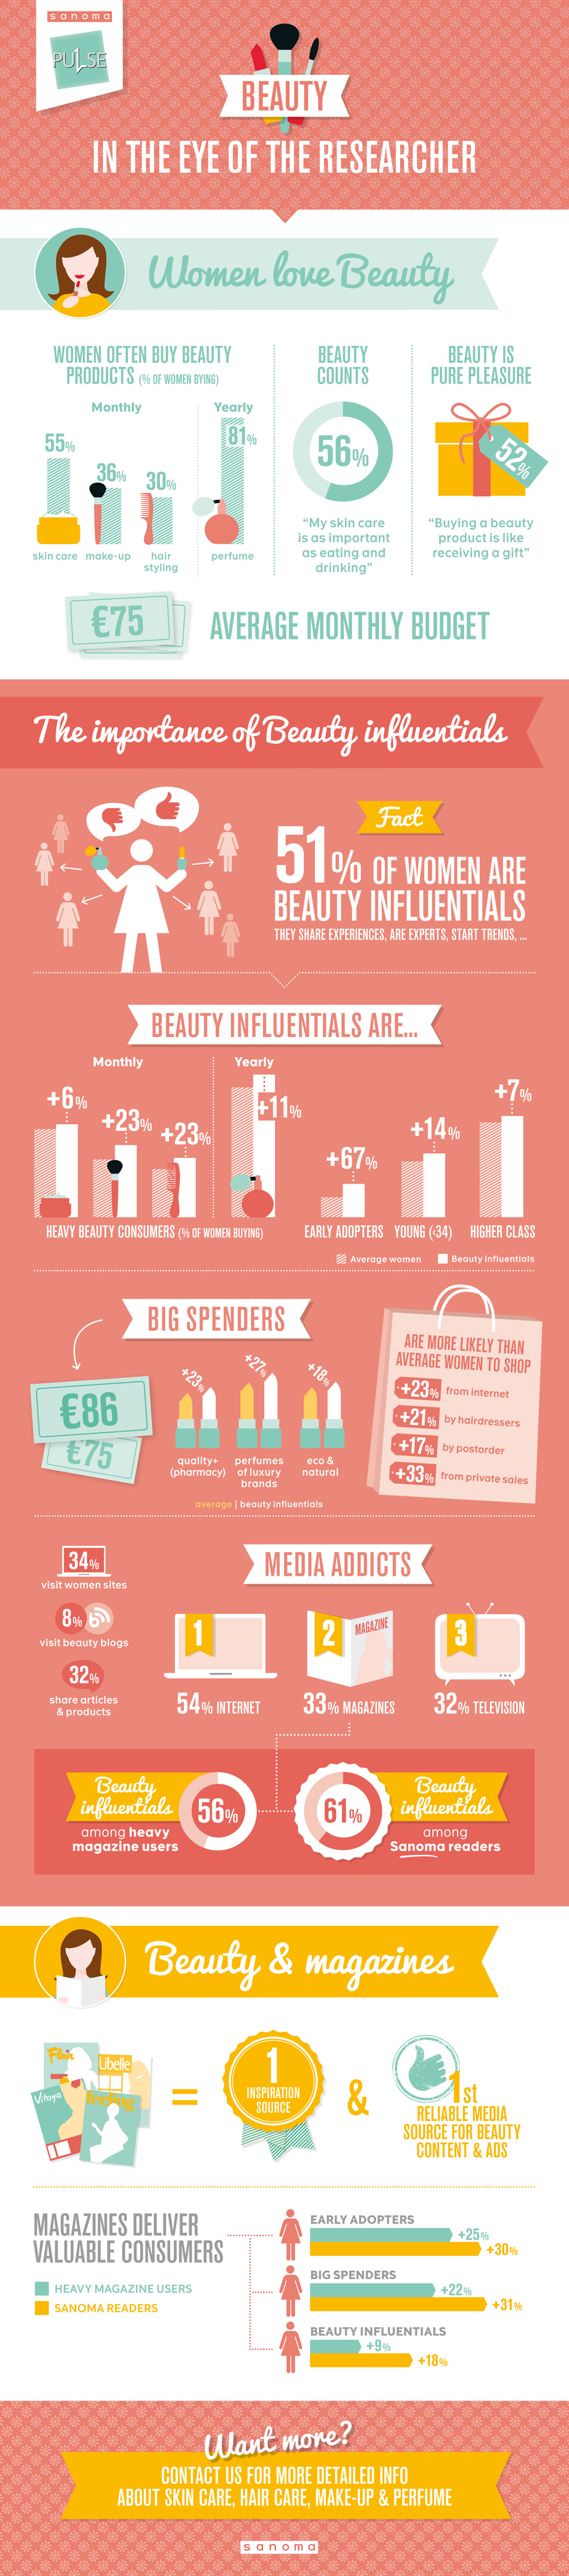 infographic-pulse-beauty